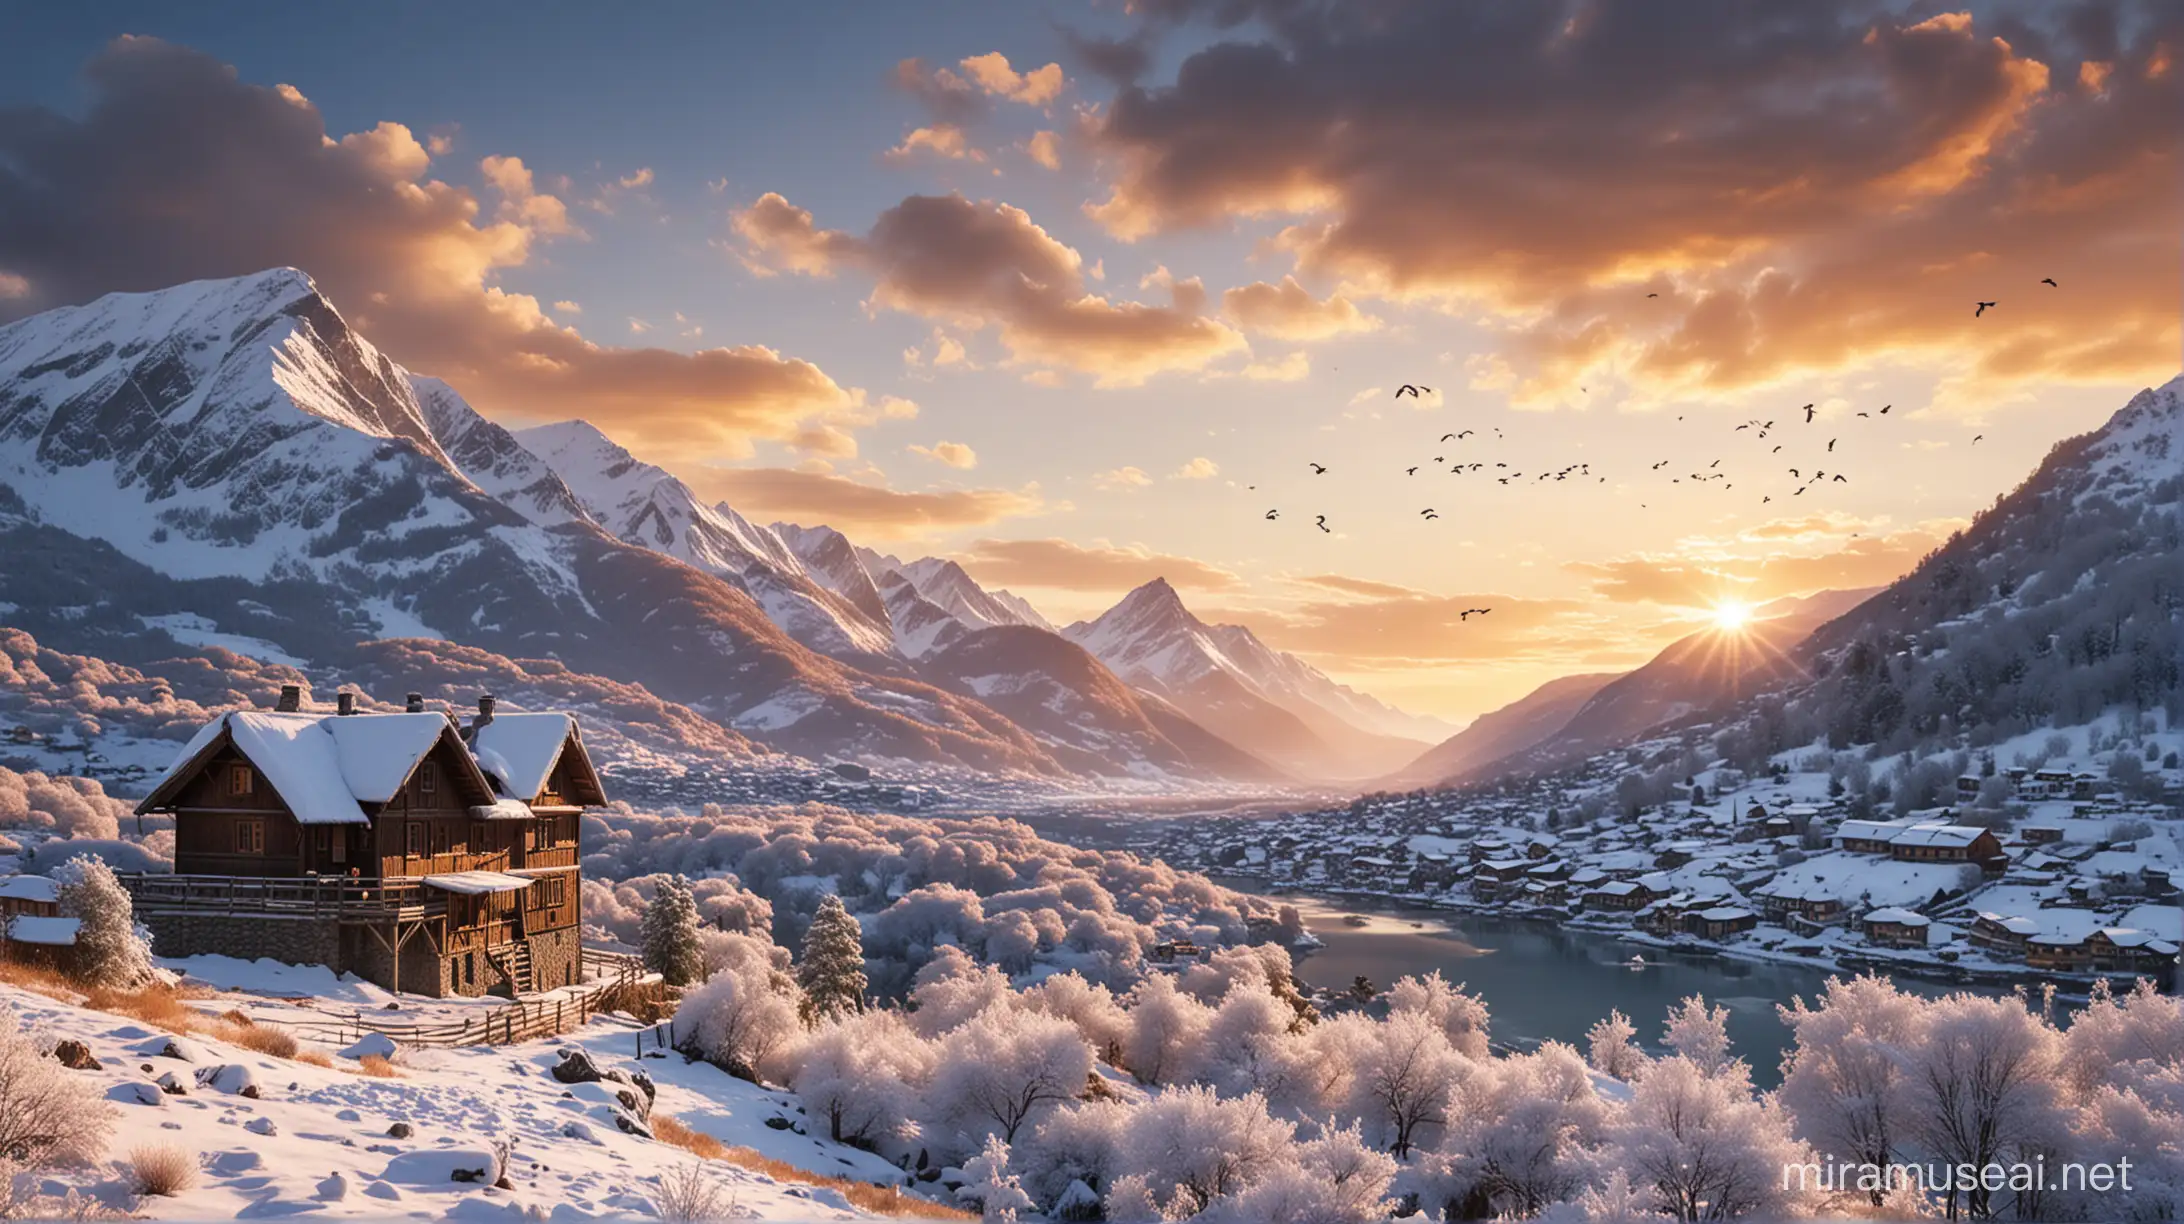 Capturing Pristine Beauty SnowCapped Mountains and Cozy House by Canon Camera